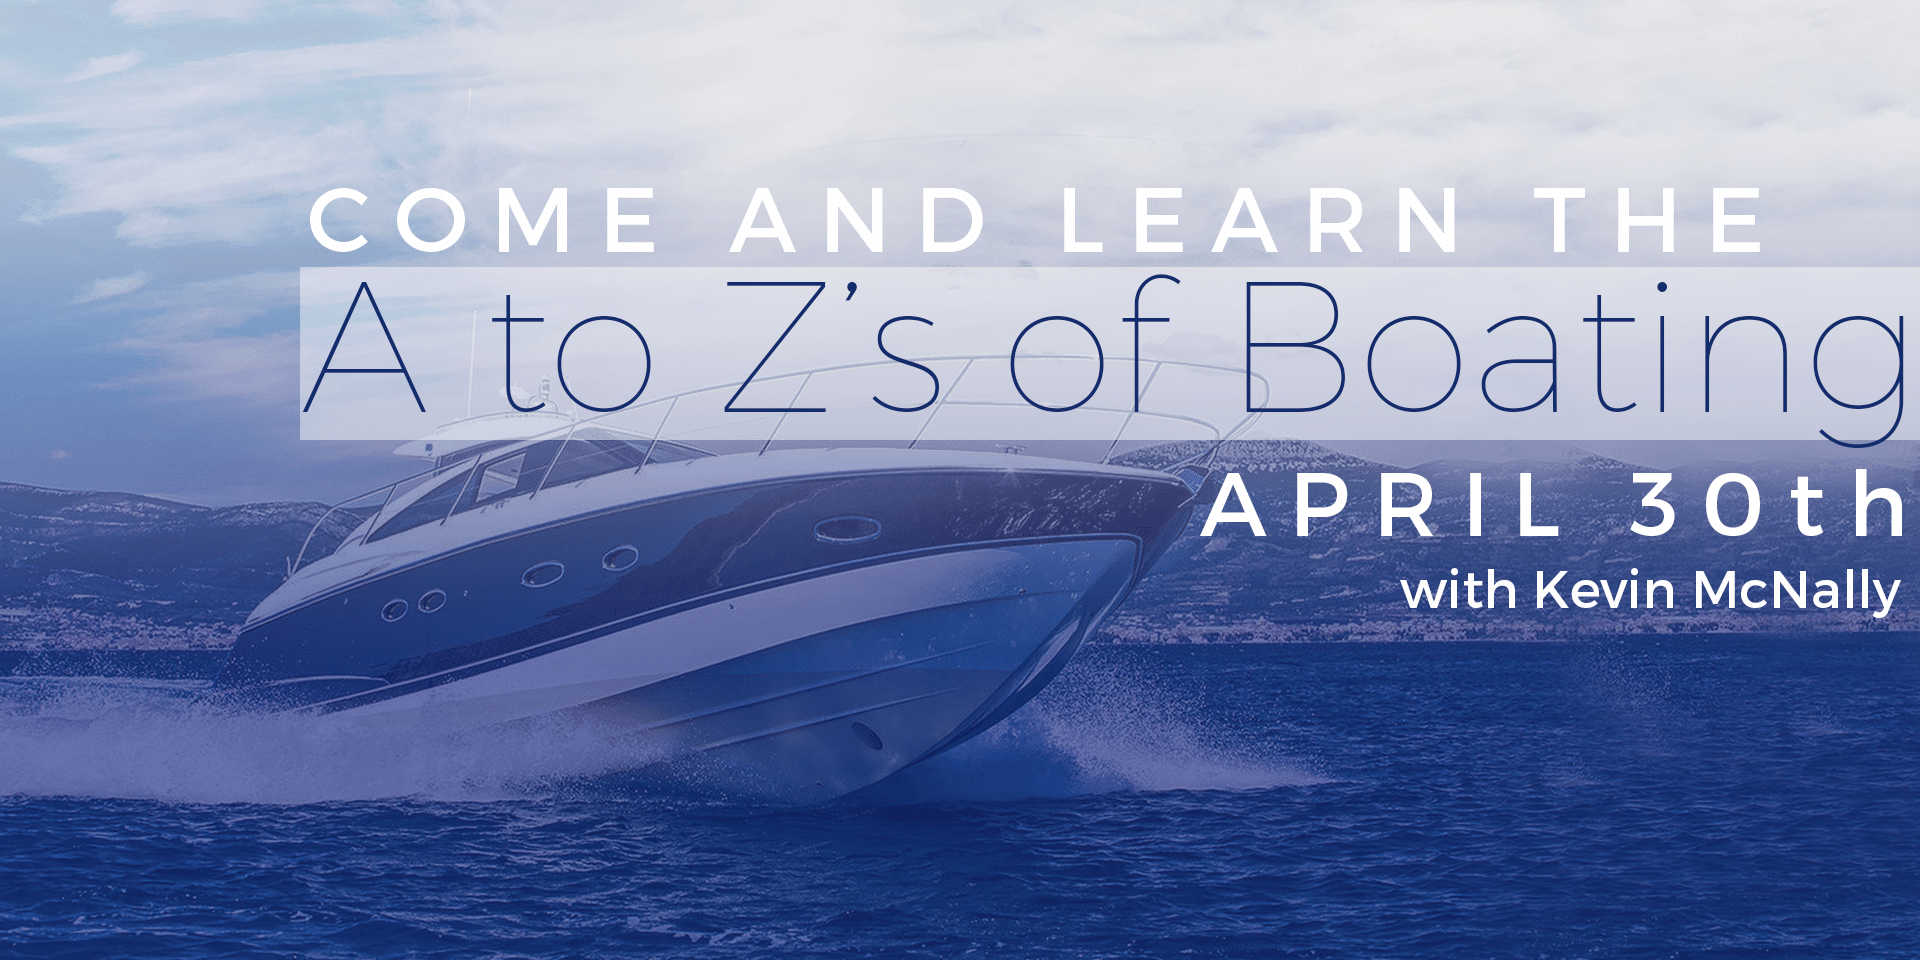 The A to Z’s of Boating